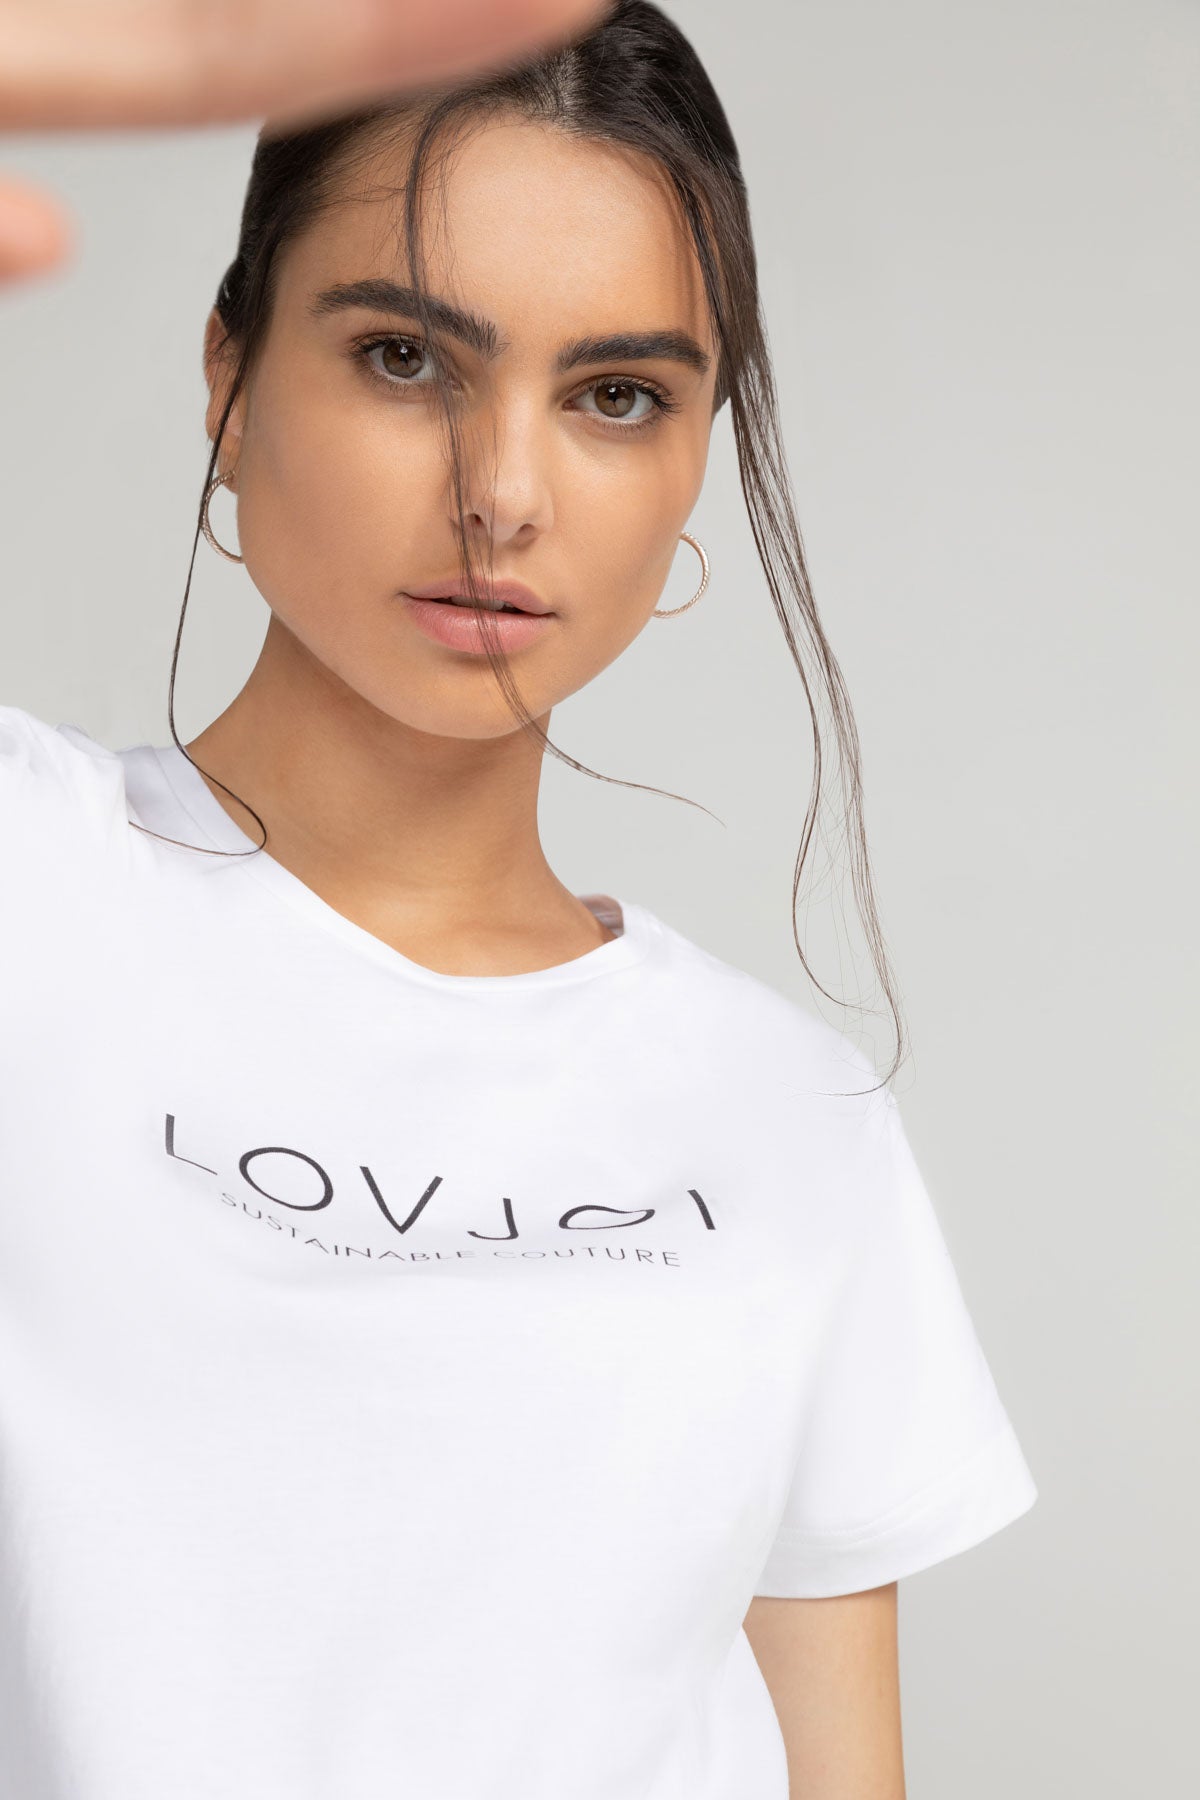 T-shirt LOVJOI logo in white from LOVJOI made of organic cotton